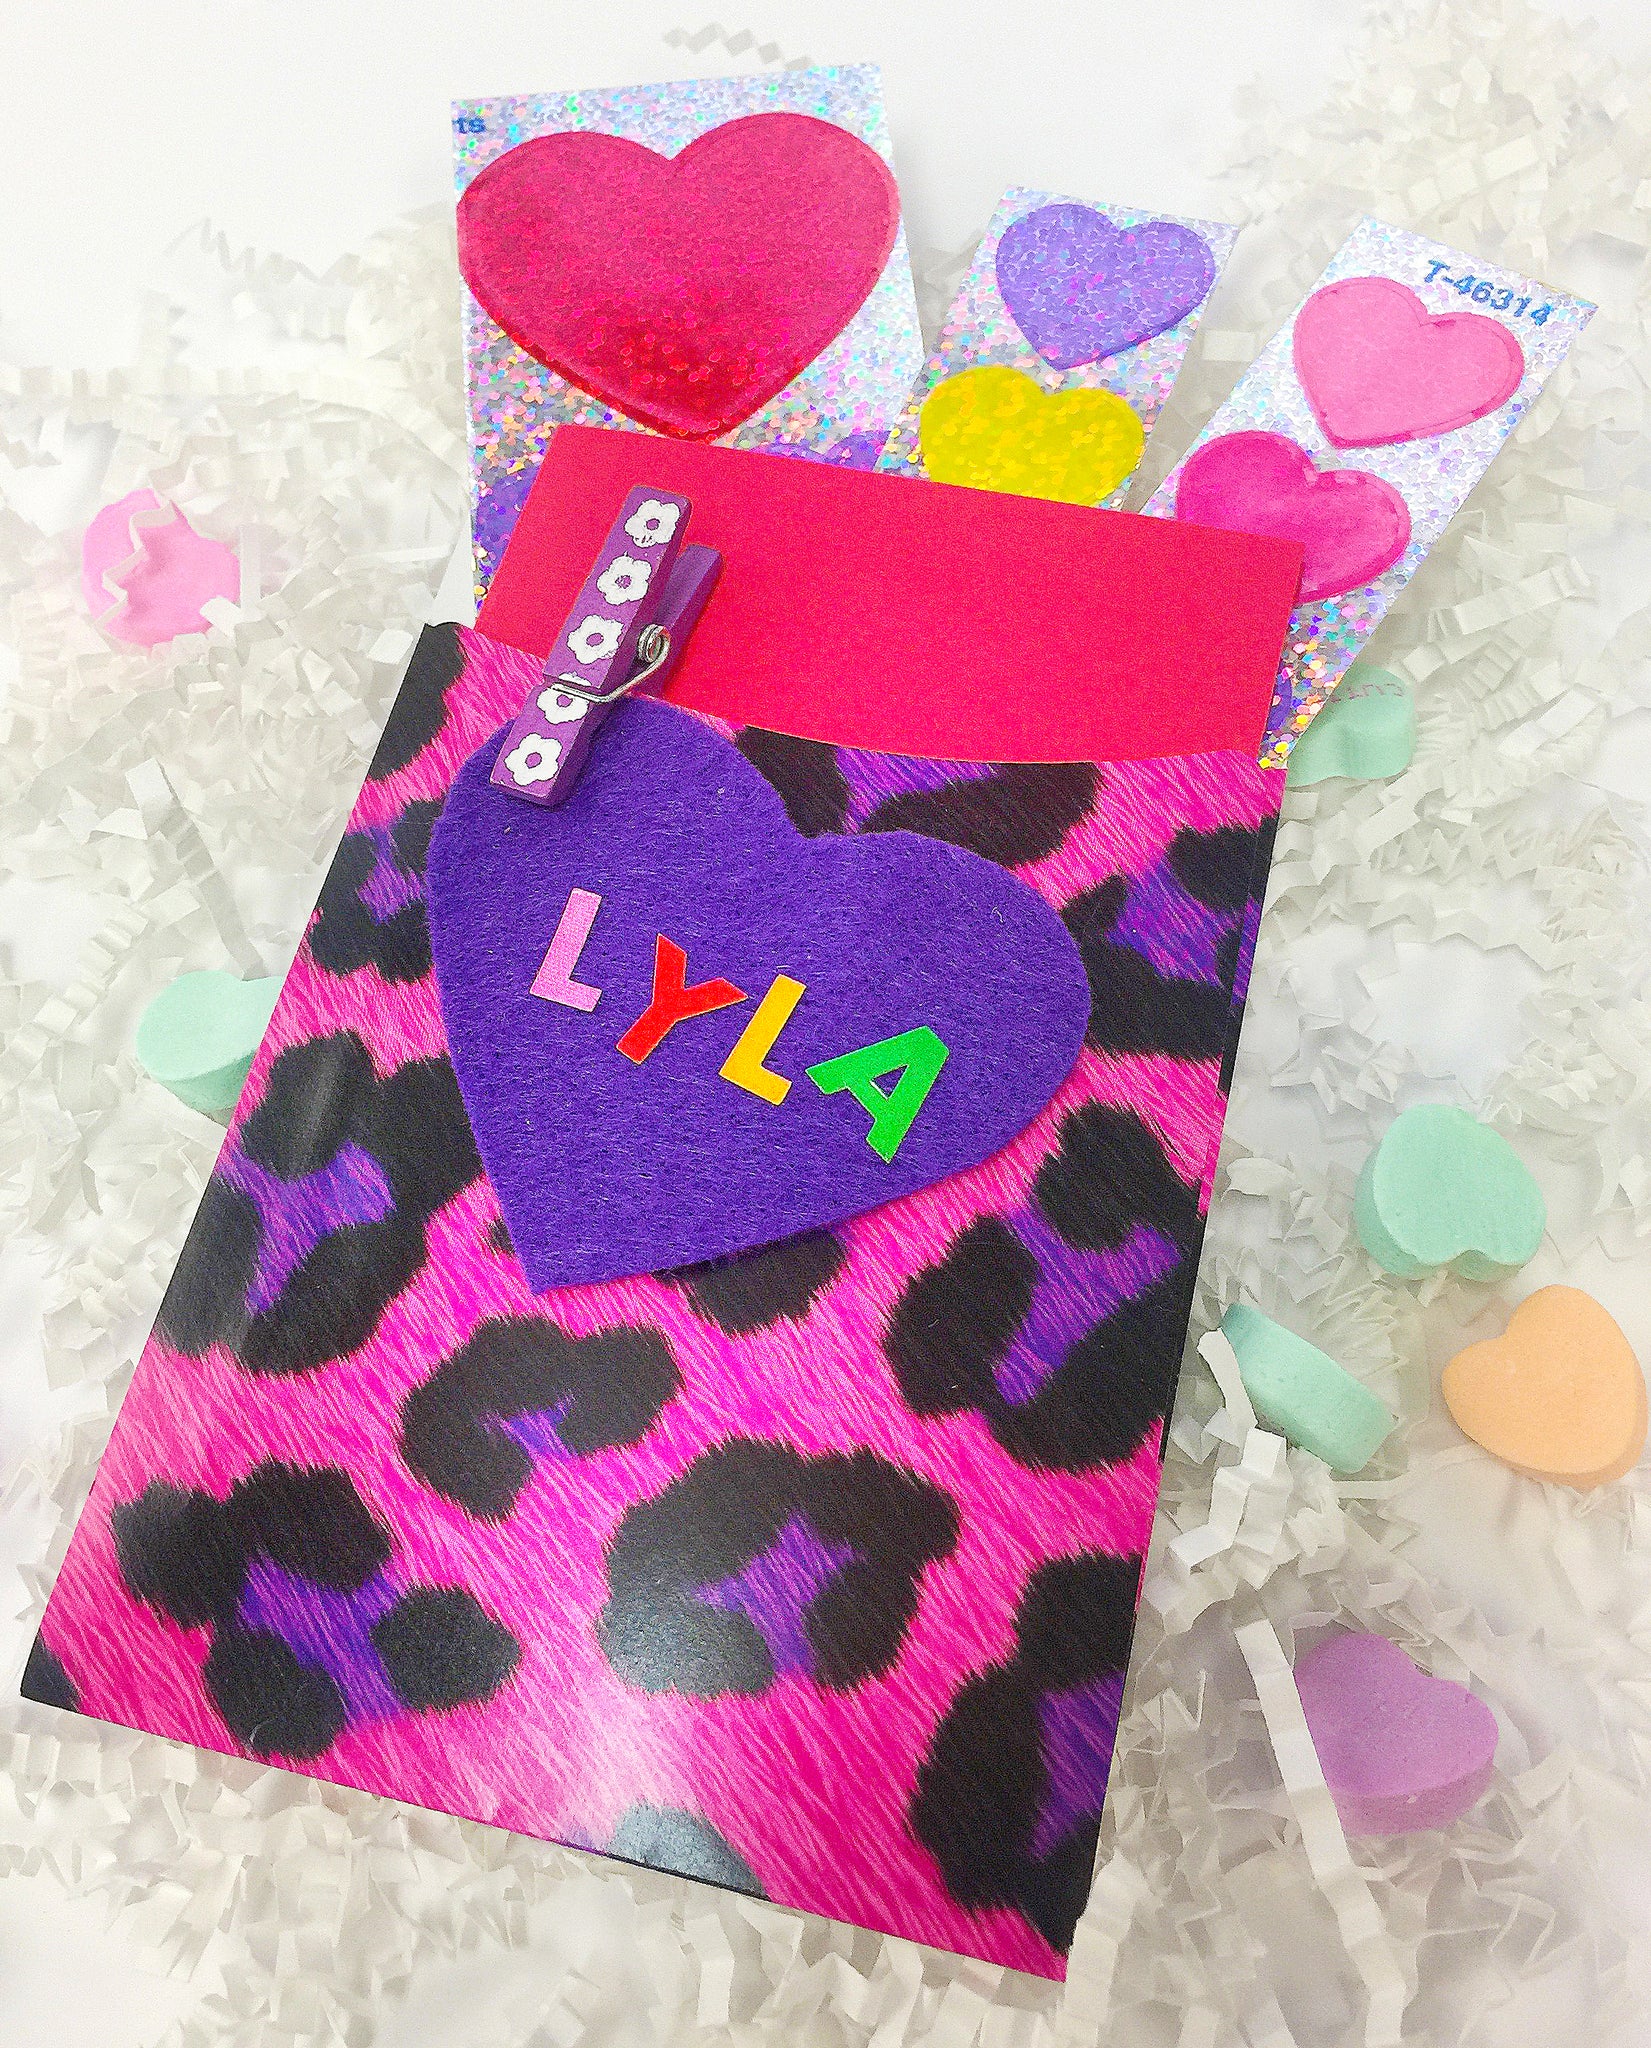 easy DIY valentine candy holder kid project